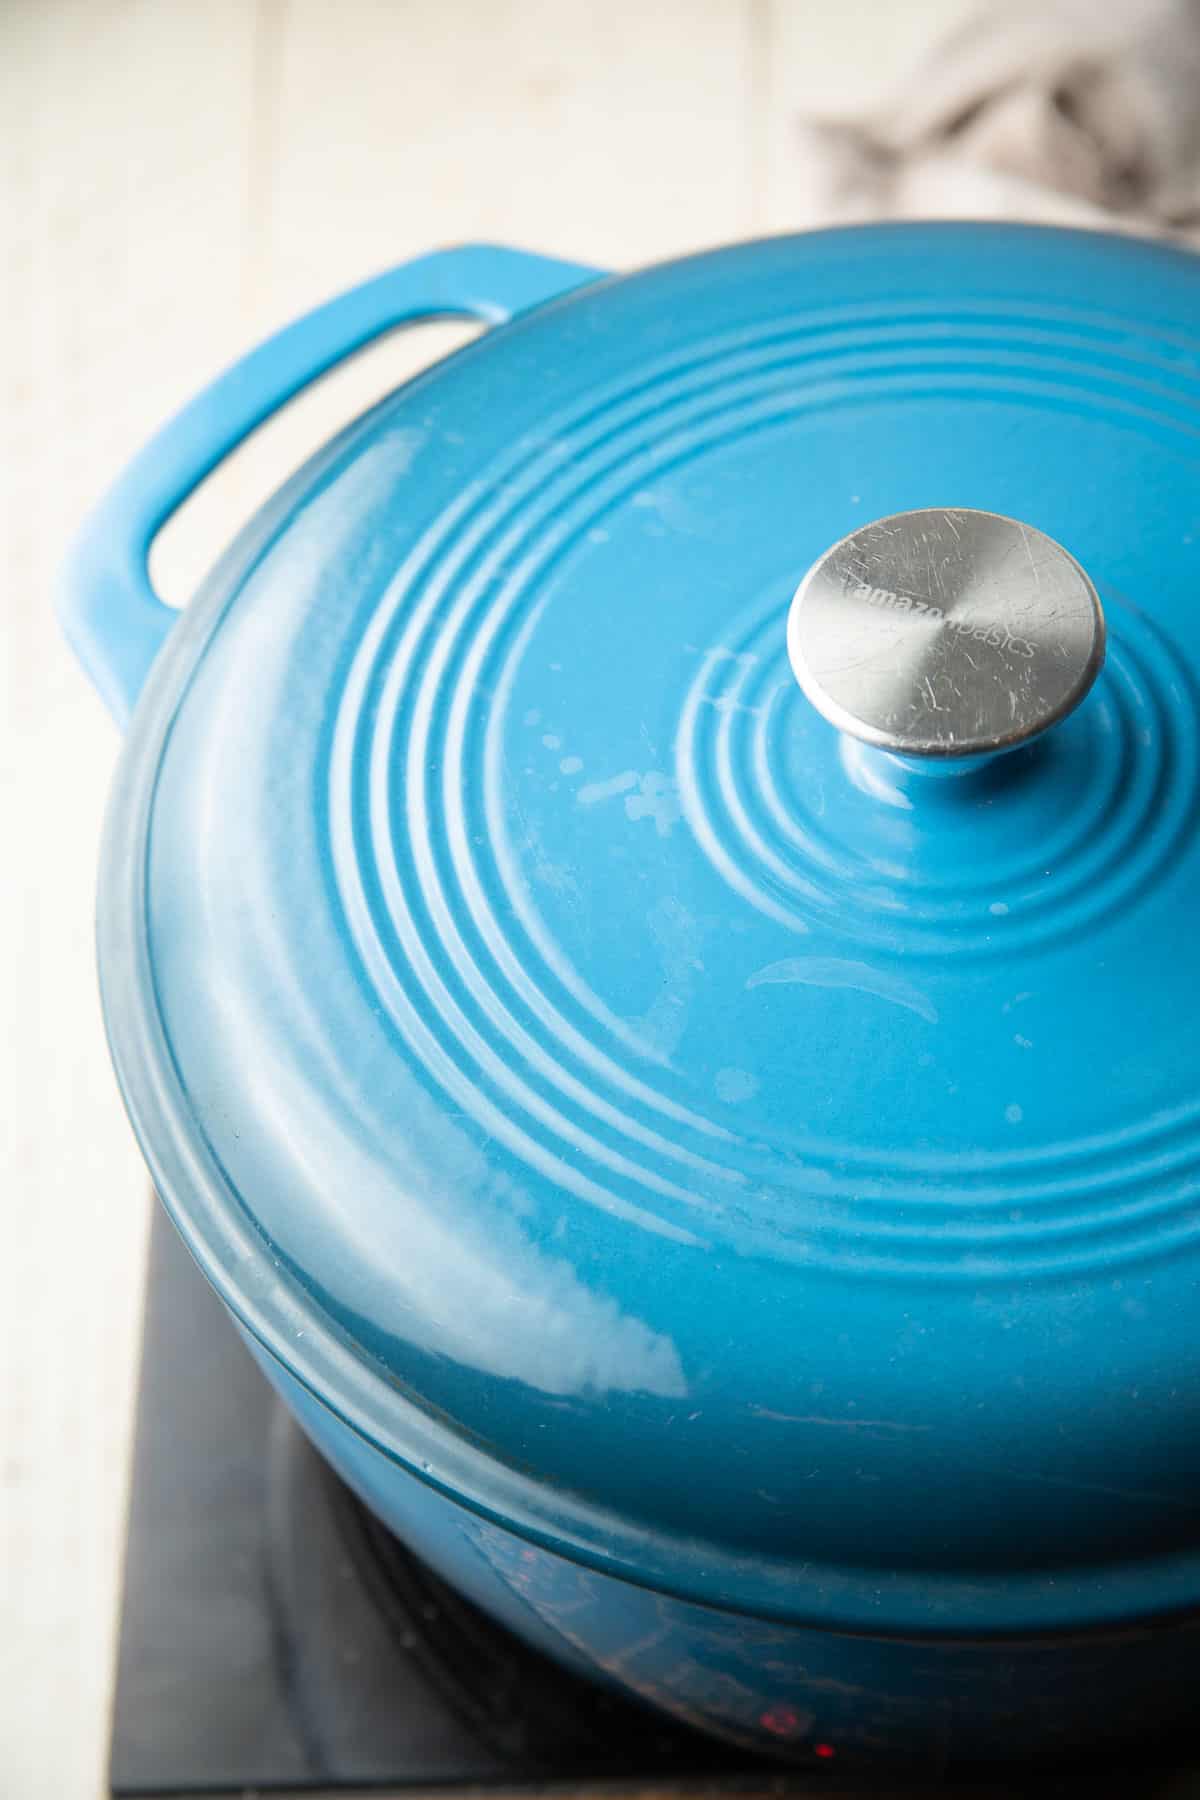 Blue Dutch oven with a lid on top.